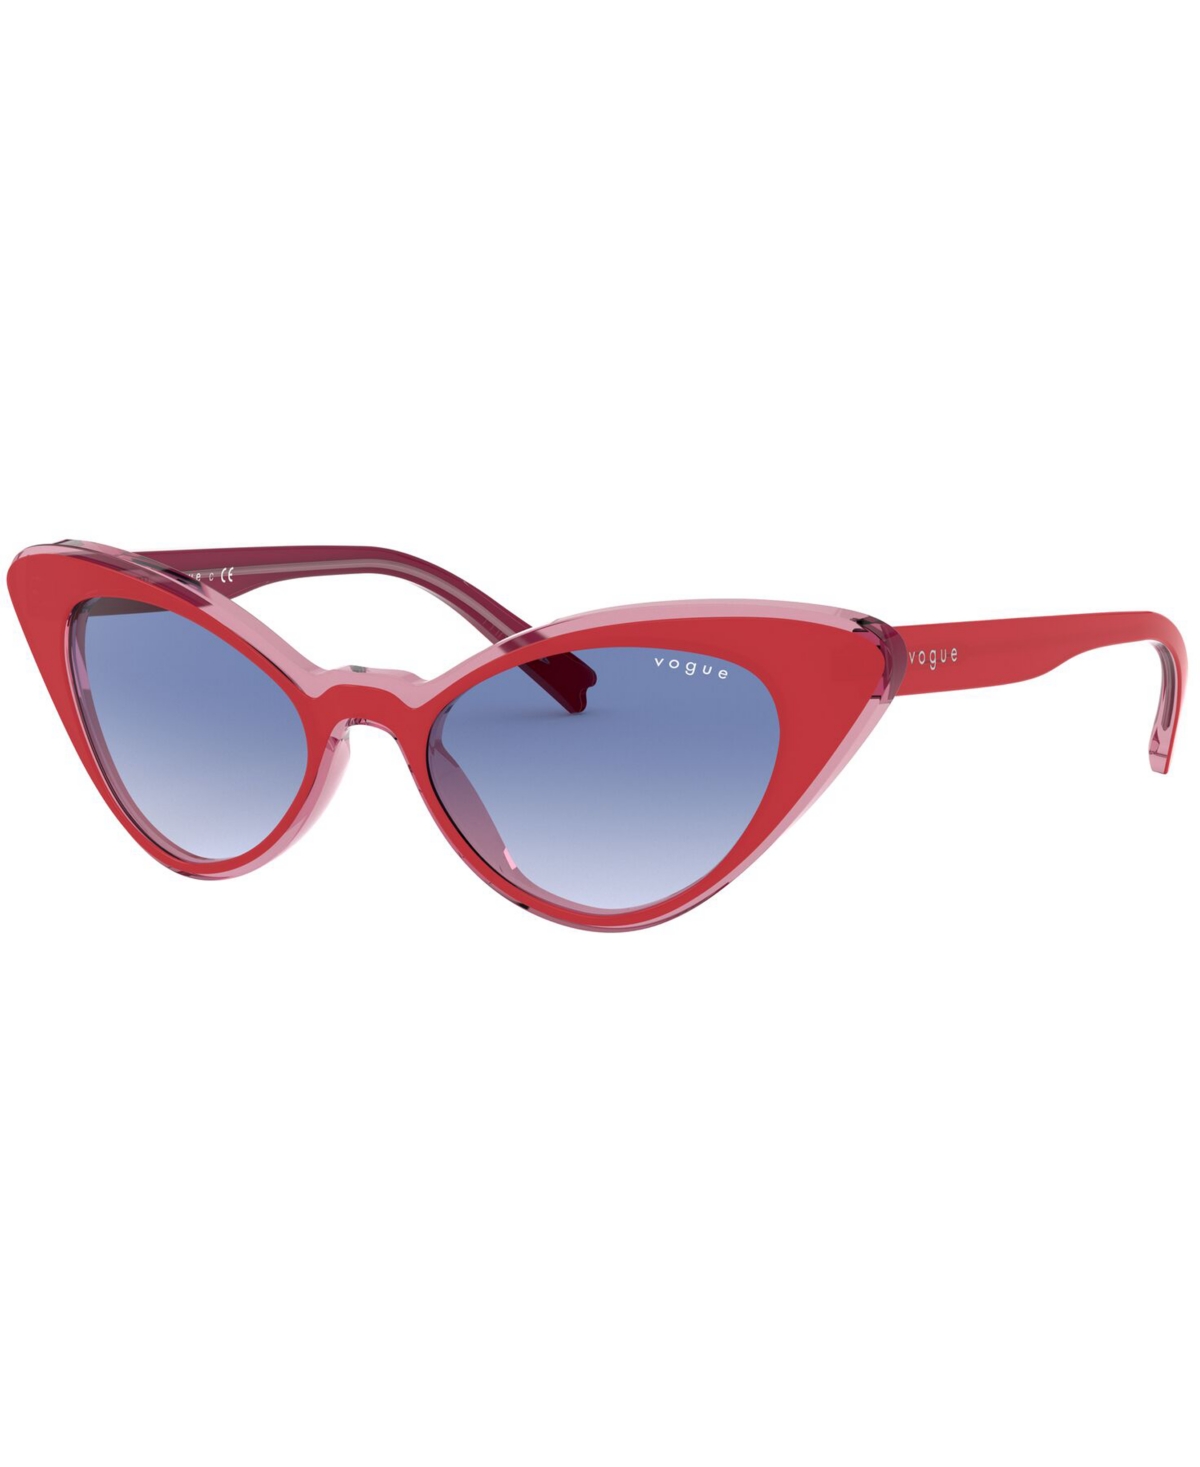 Vogue Eyewear Mbb X  Sunglasses, Vo5317s In Top Red,pink Transparent,clear Gradient